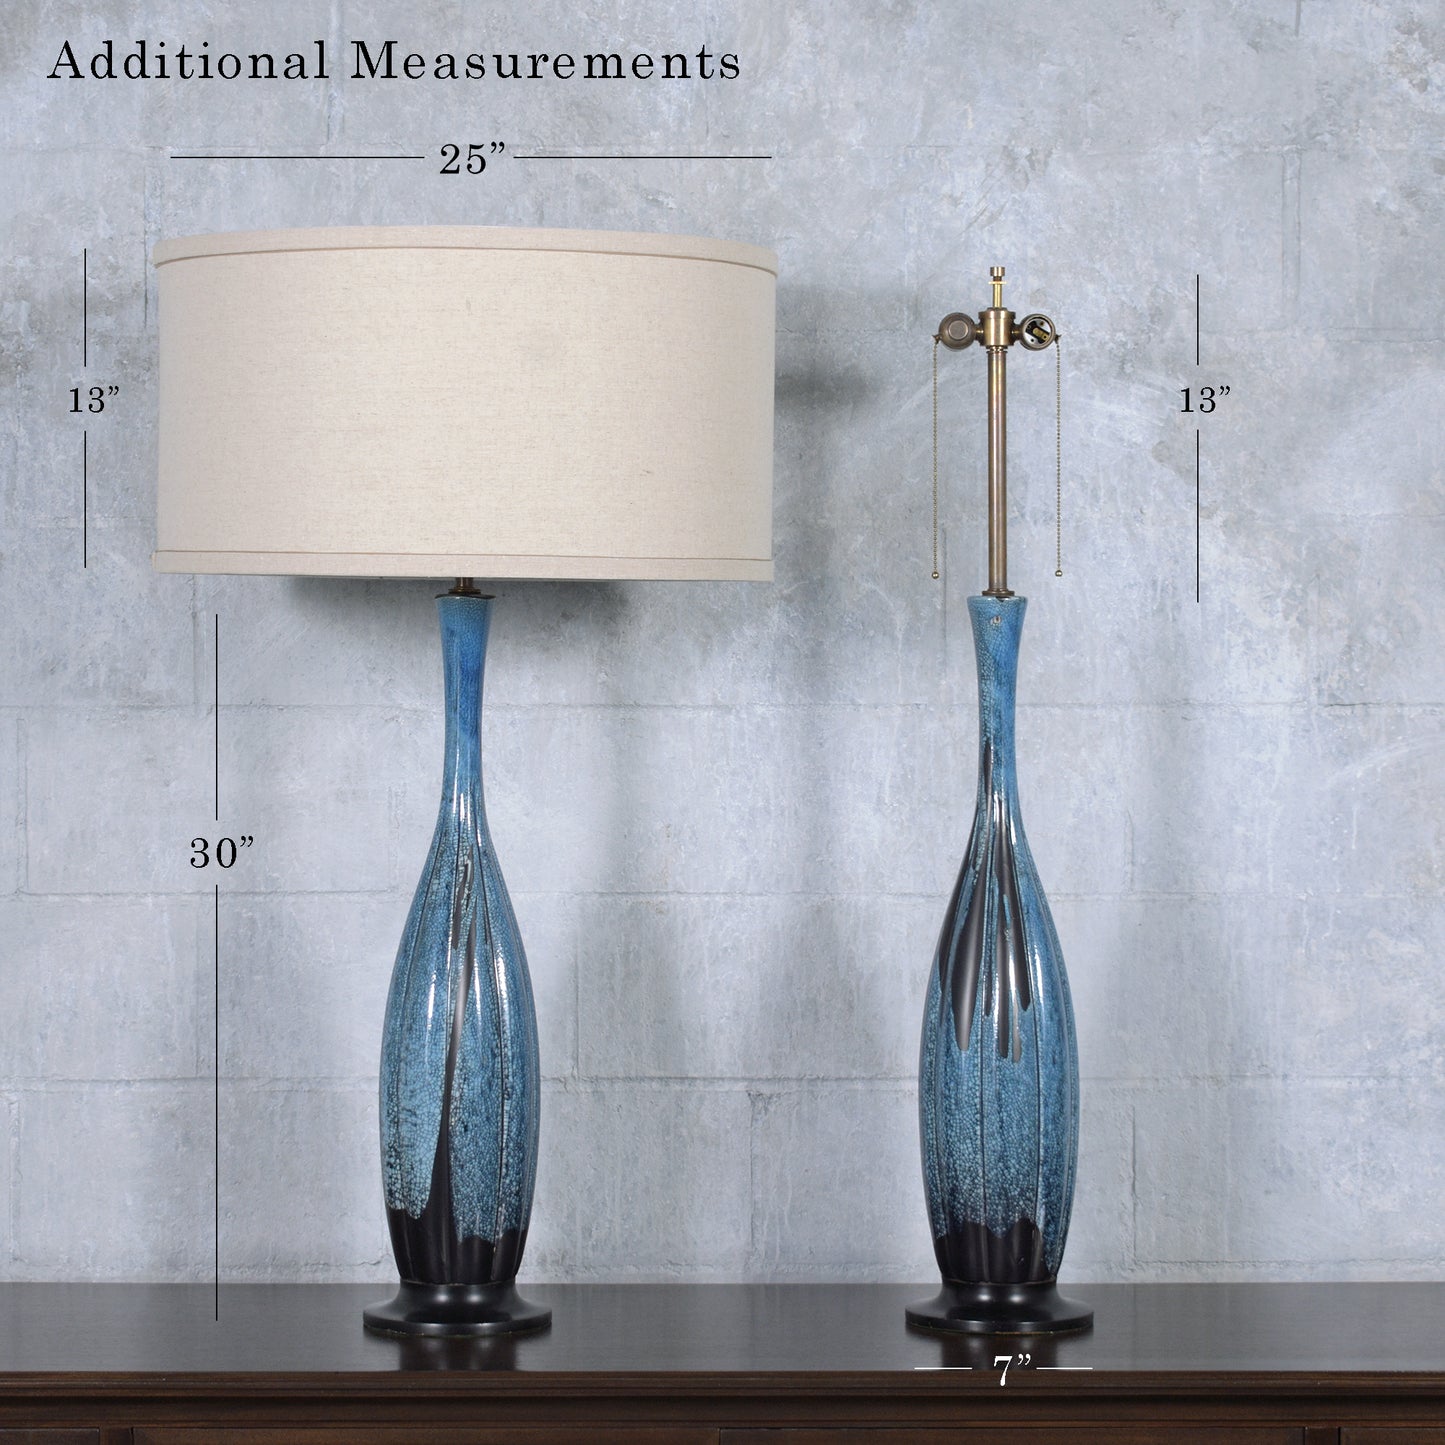 Restored Mid-Century Porcelain Tall Table Lamps in Blue and Black - a Pair